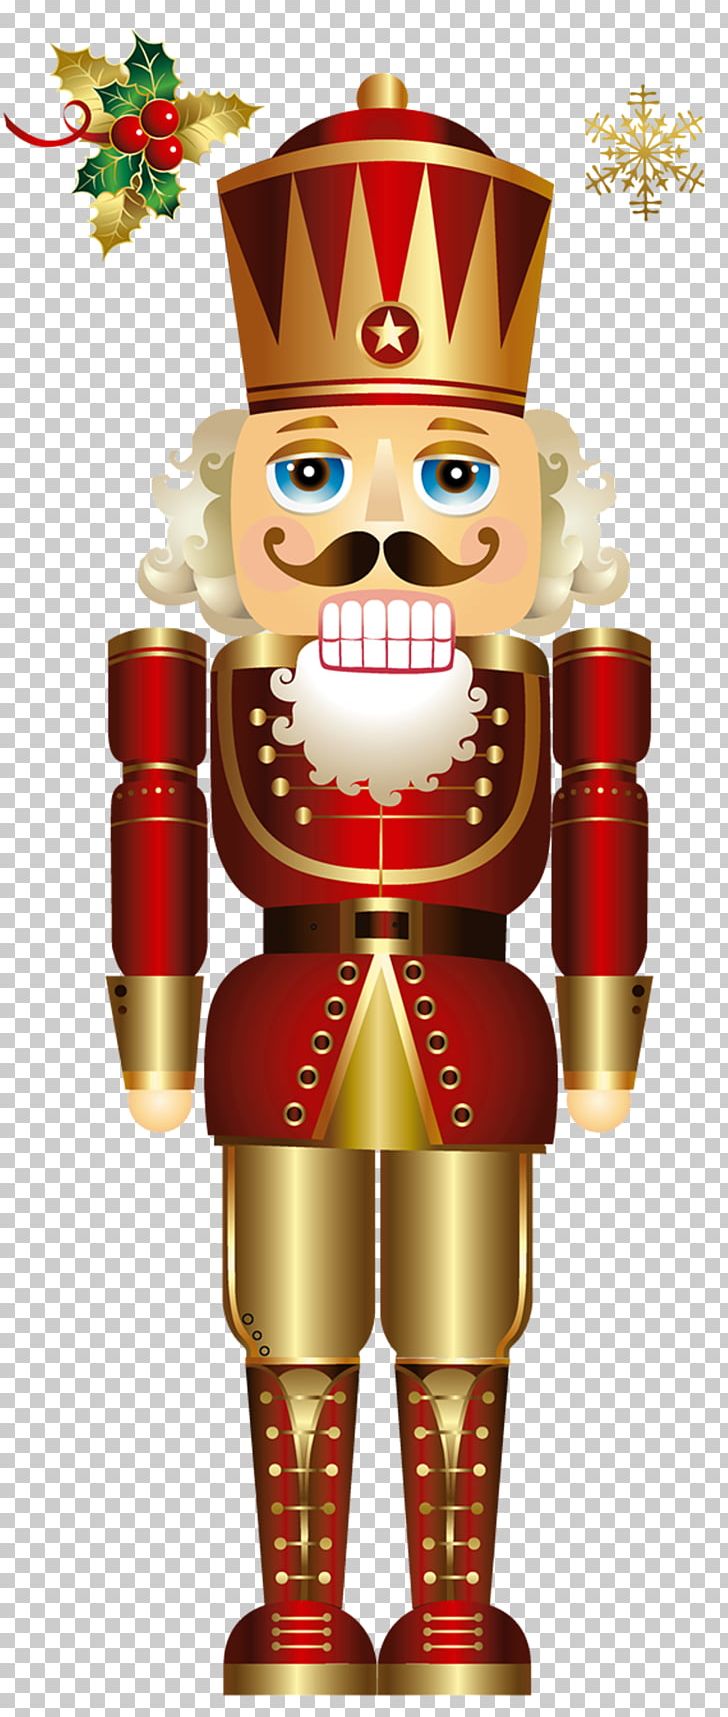 The Nutcracker And The Mouse King Nutcracker Doll PNG, Clipart, Christmas, Christmas Decoration, Christmas Ornament, Clip Art, Decor Free PNG Download